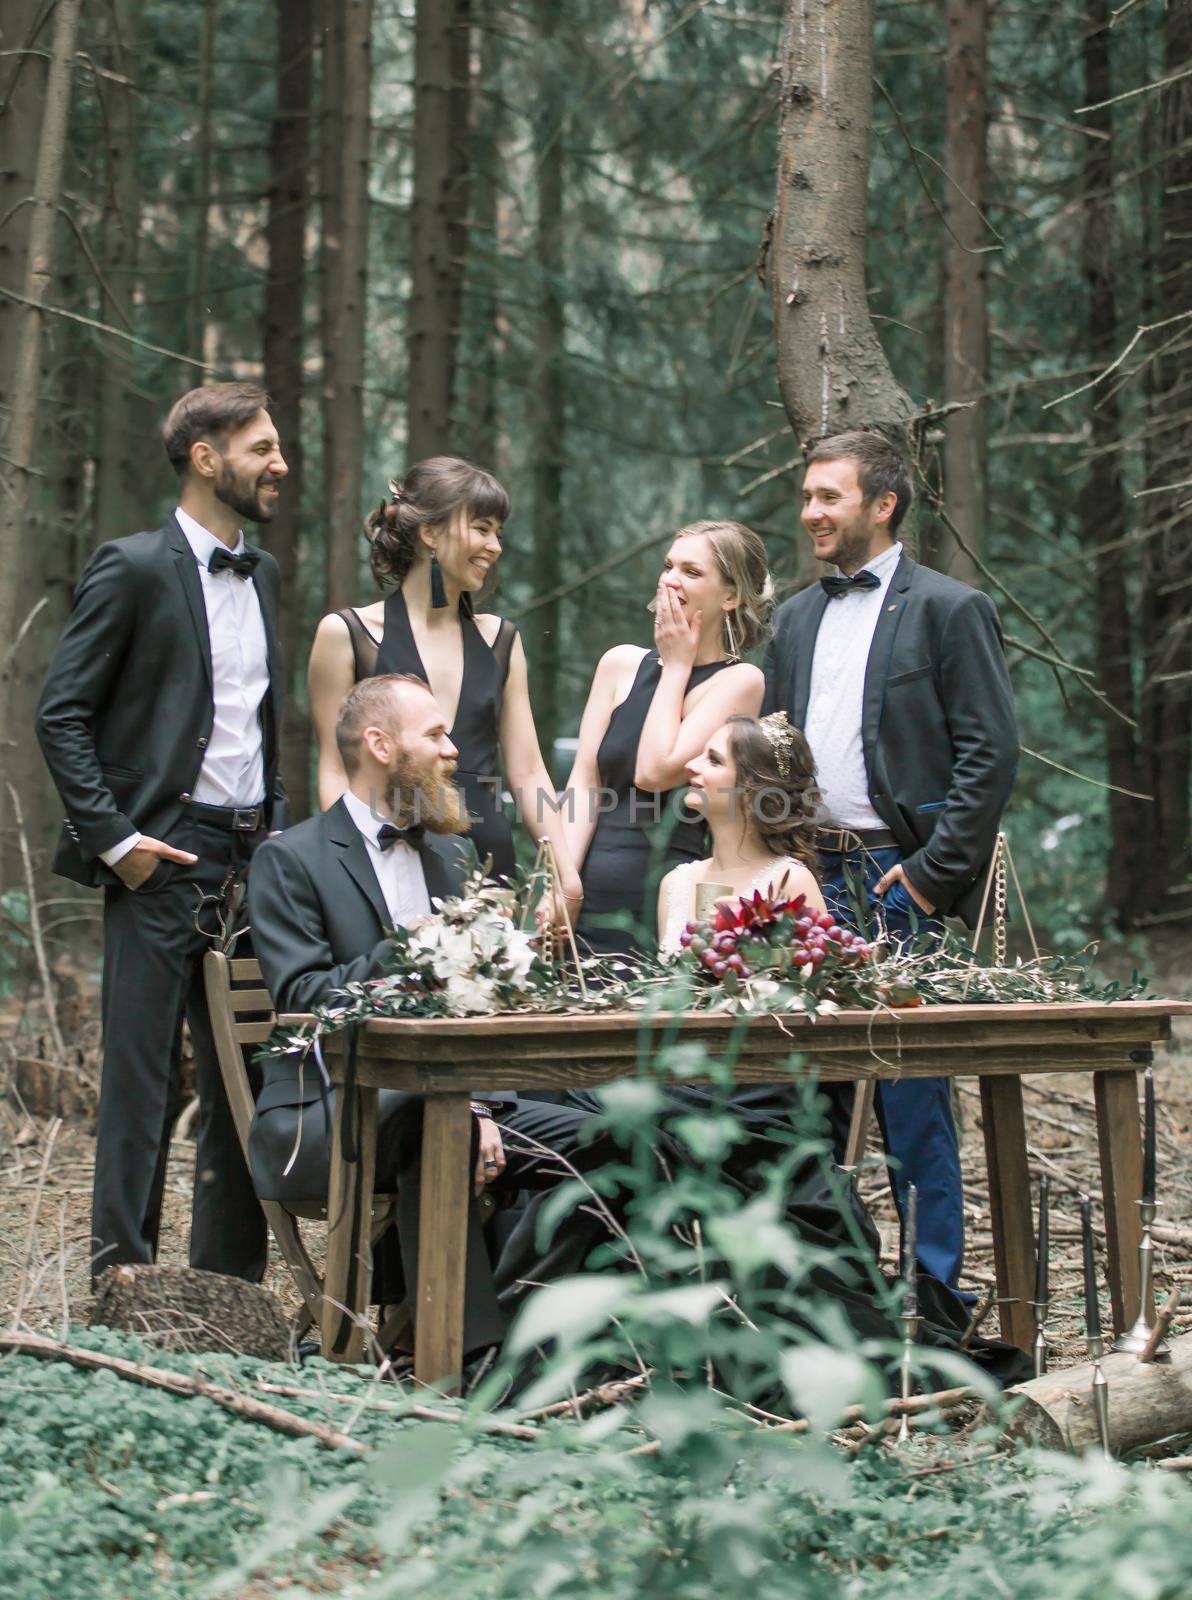 bride and groom with friends at a picnic in the pine forest by SmartPhotoLab